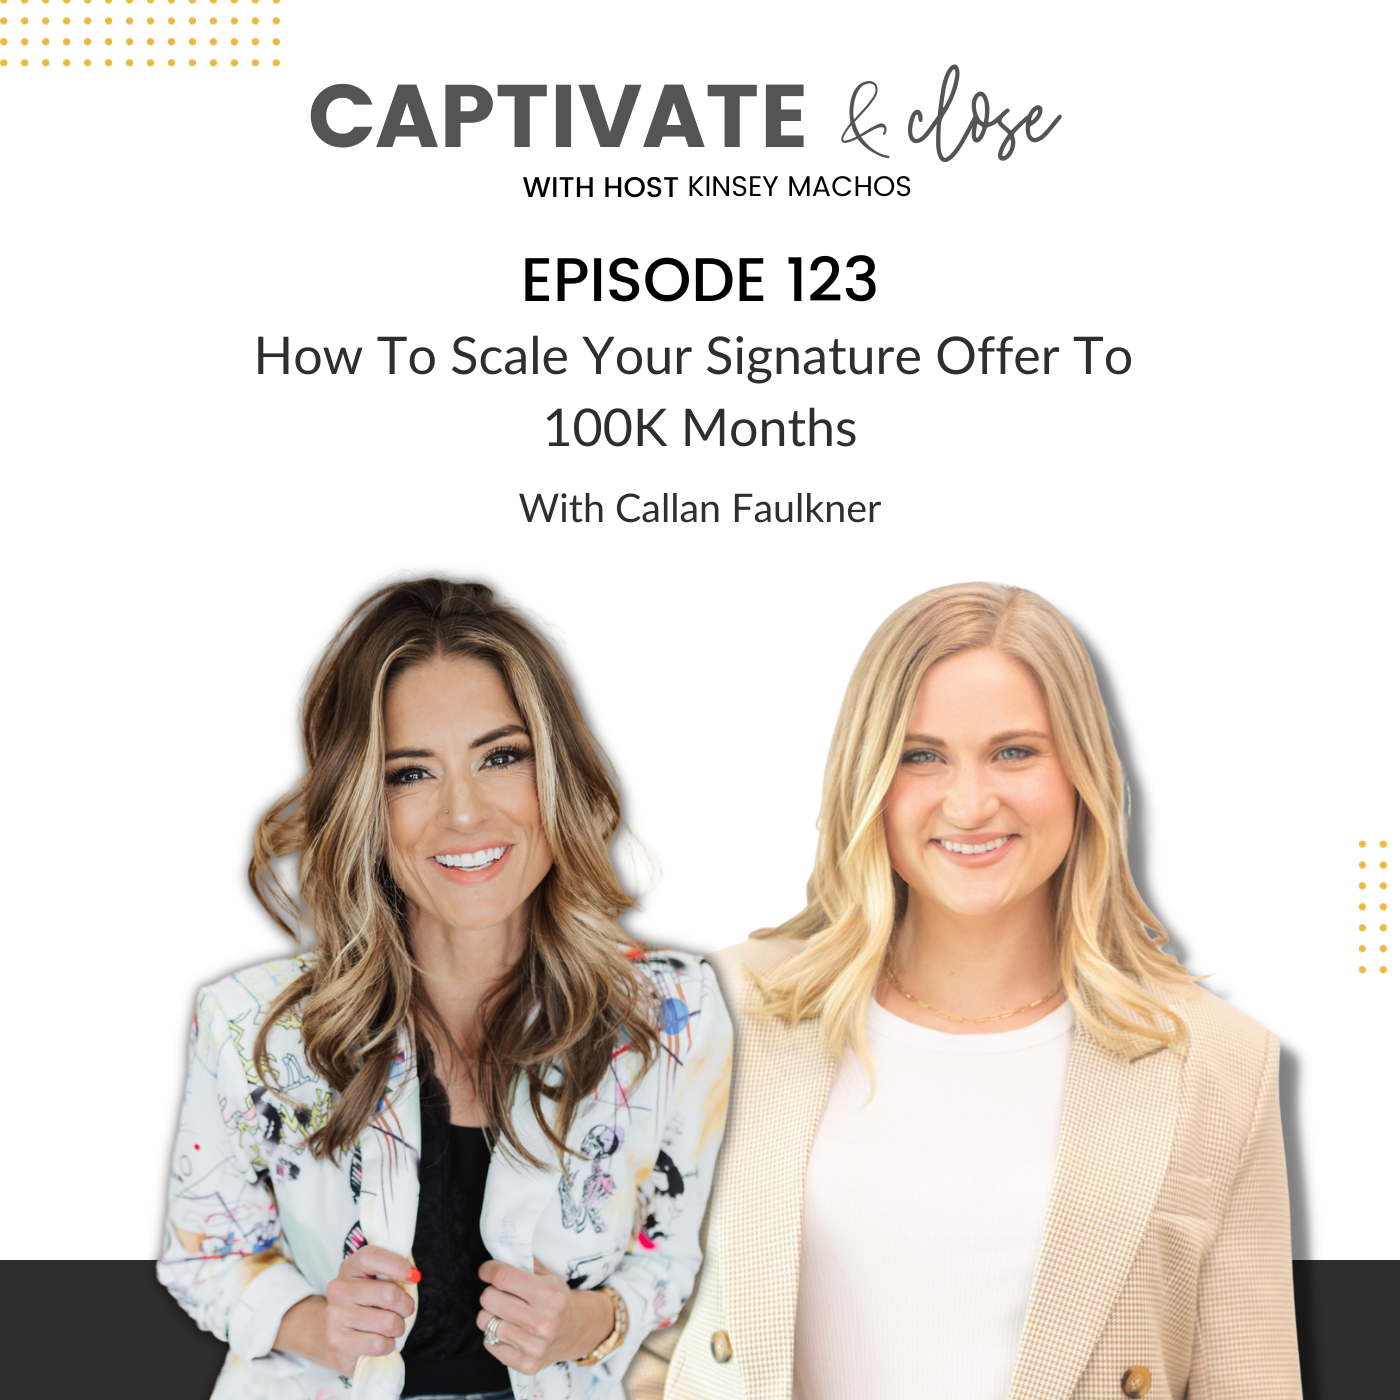 How To Scale Your Signature Offer To 100K Months With Callan Faulkner